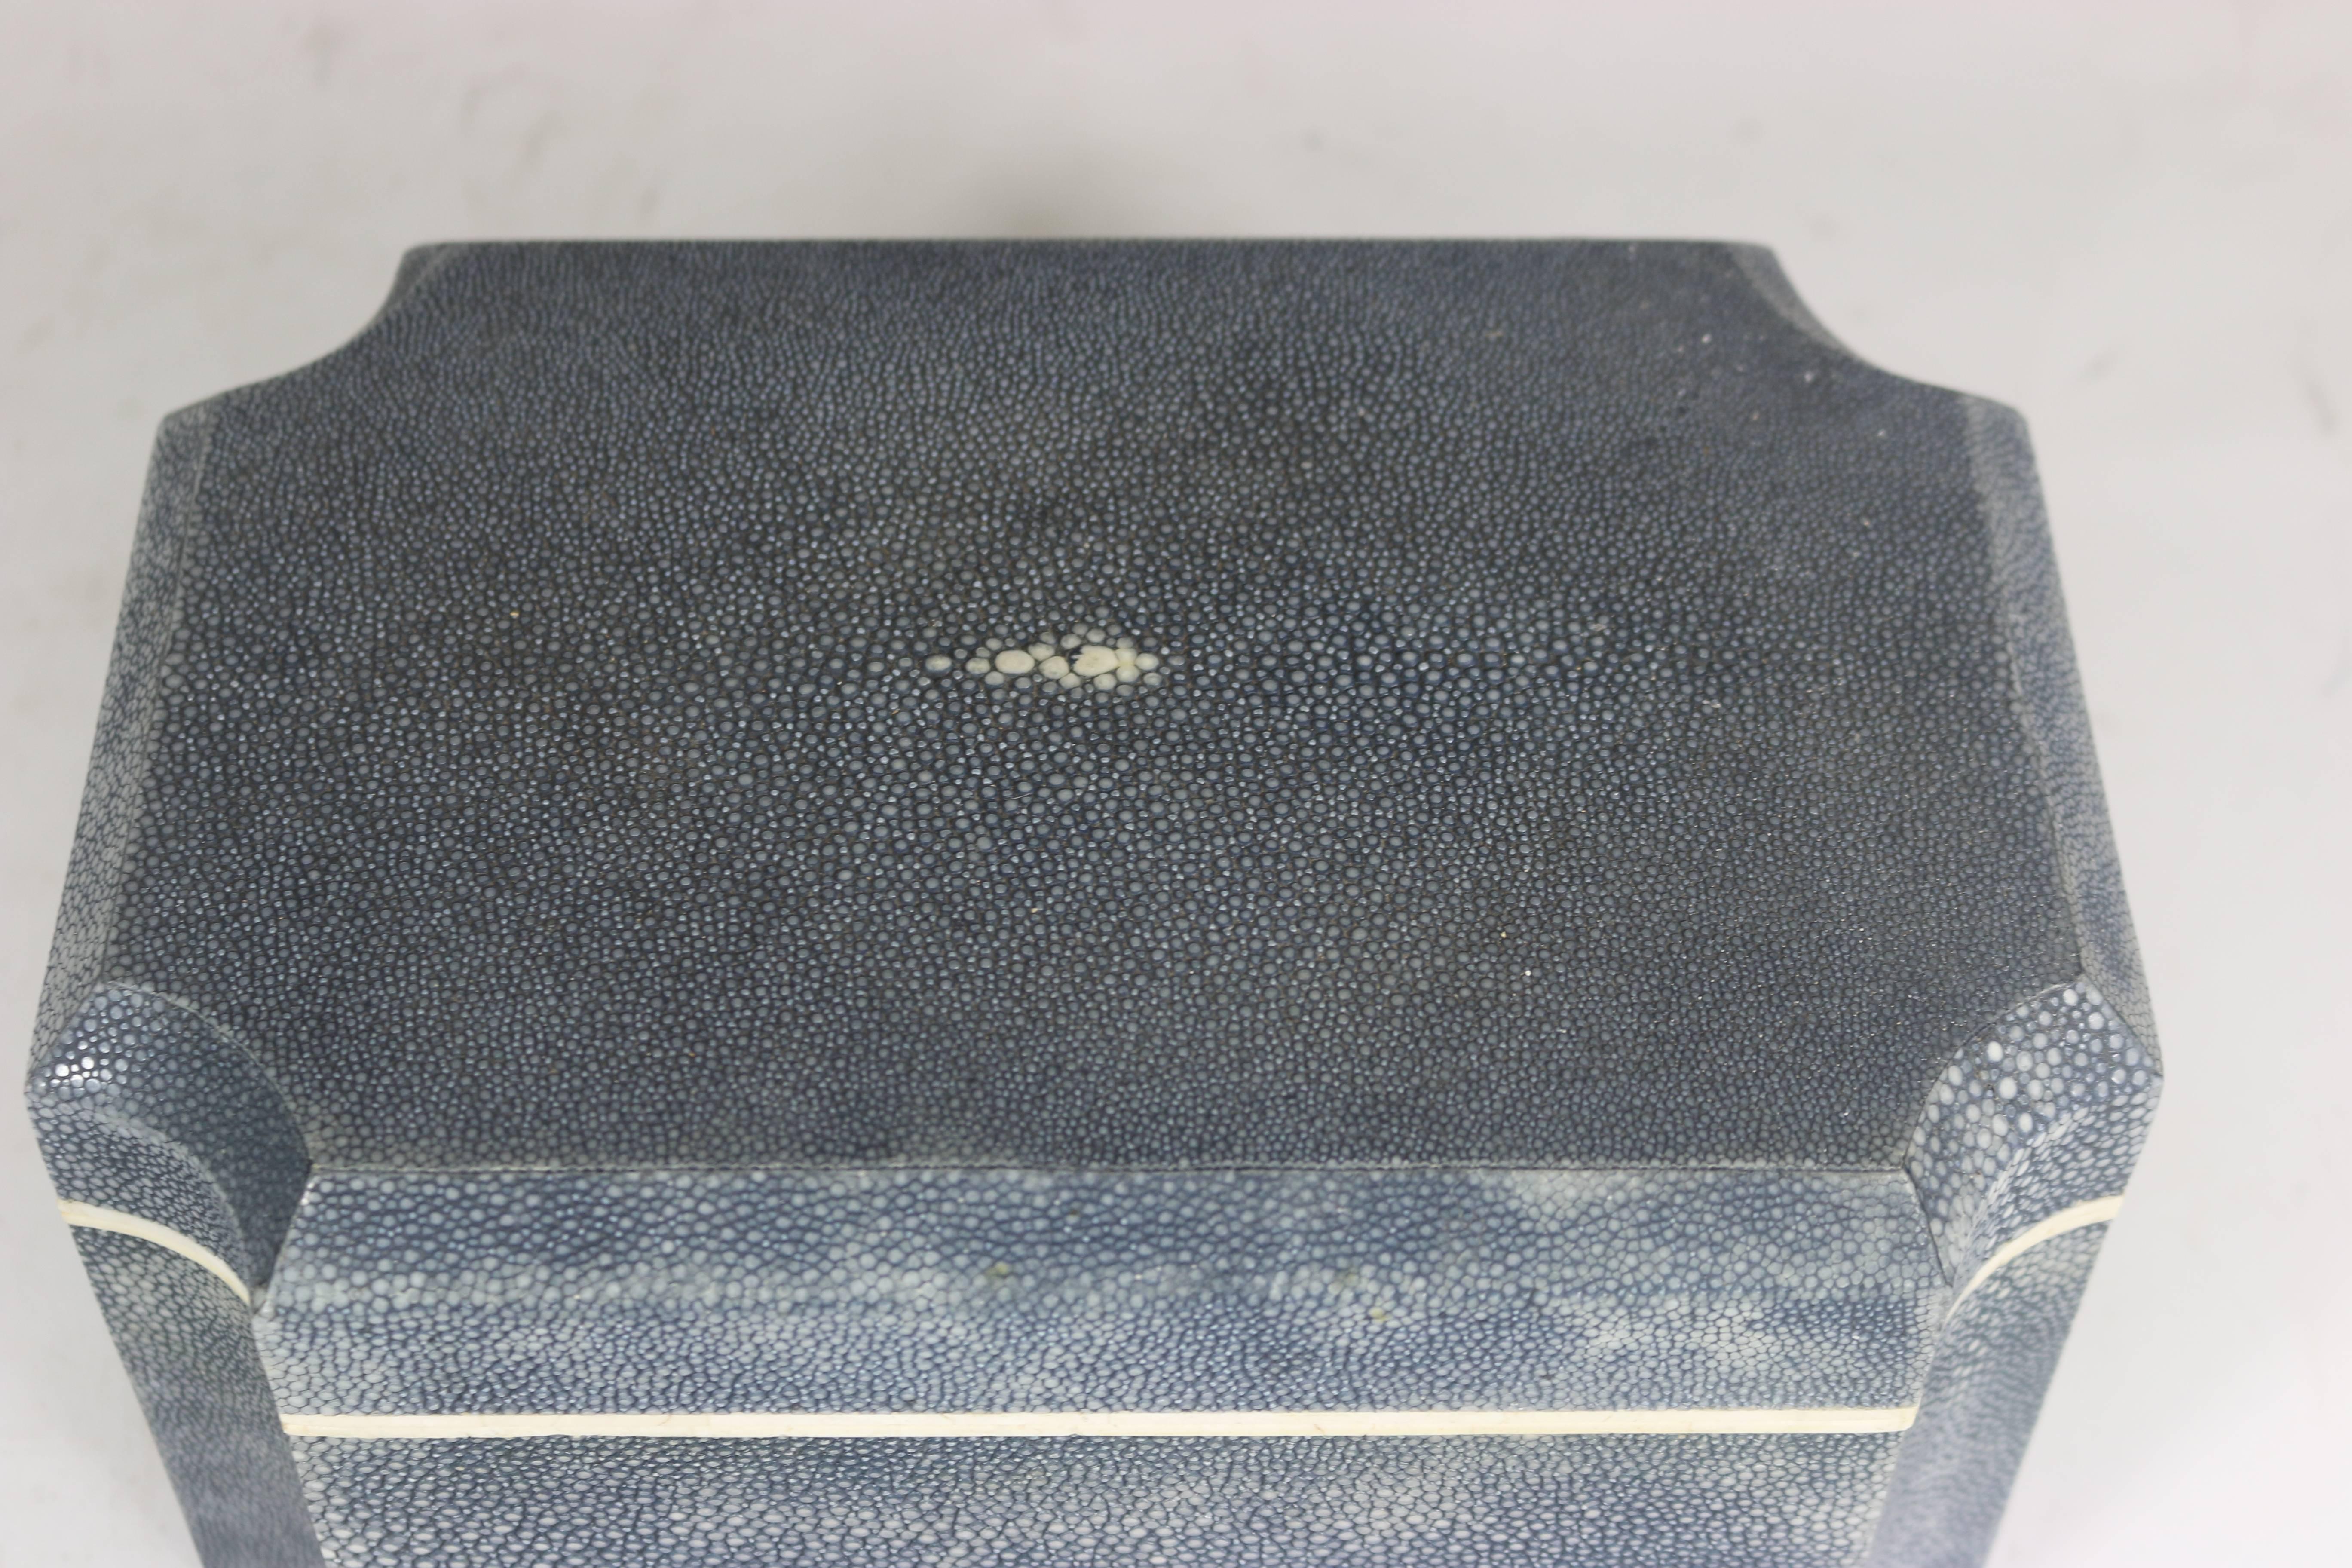 Exquisite Karl Springer Blue Shagreen and Agate Trim Box In Excellent Condition For Sale In West Palm Beach, FL